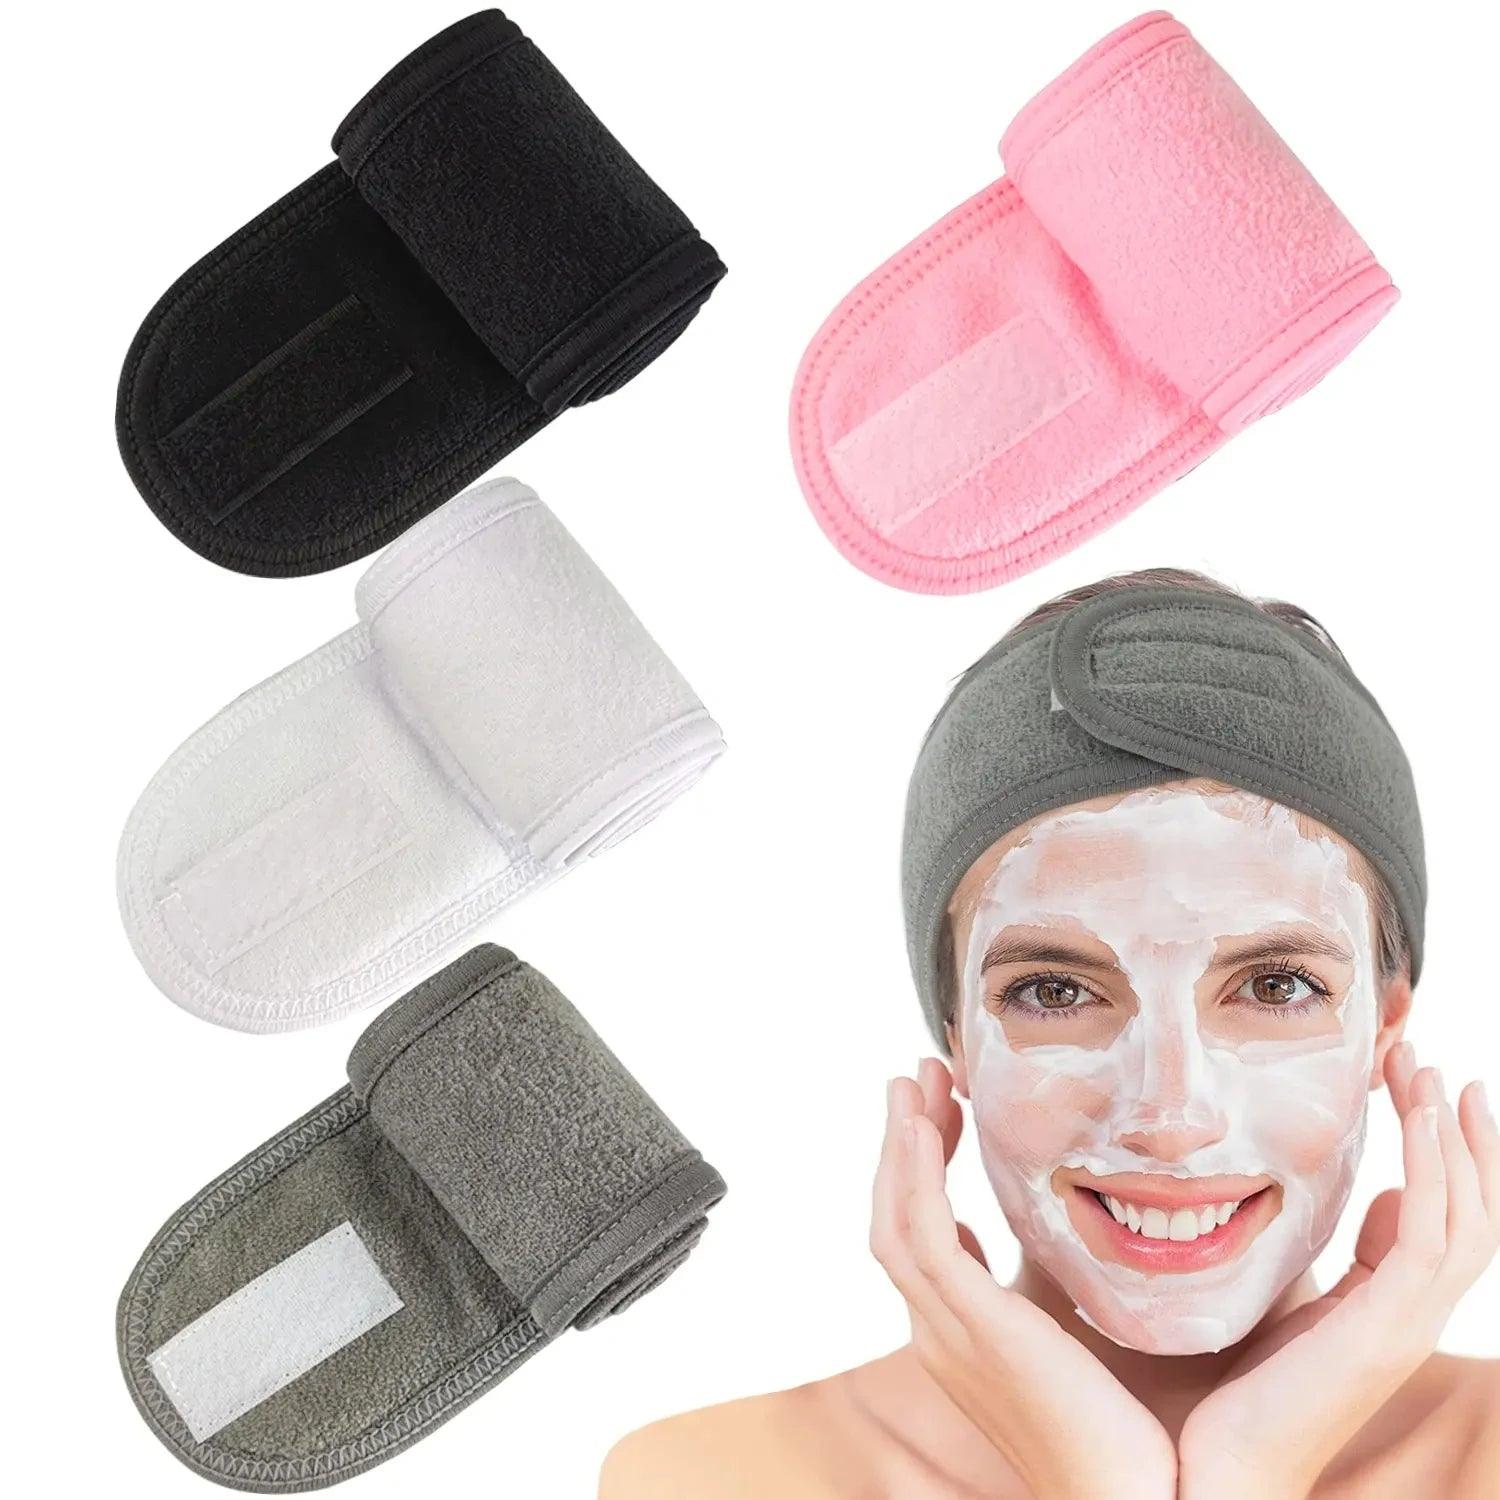 Versatile Hair and Style Headband for Women - Multi-functional and Fashionable Head Wrap  ourlum.com   